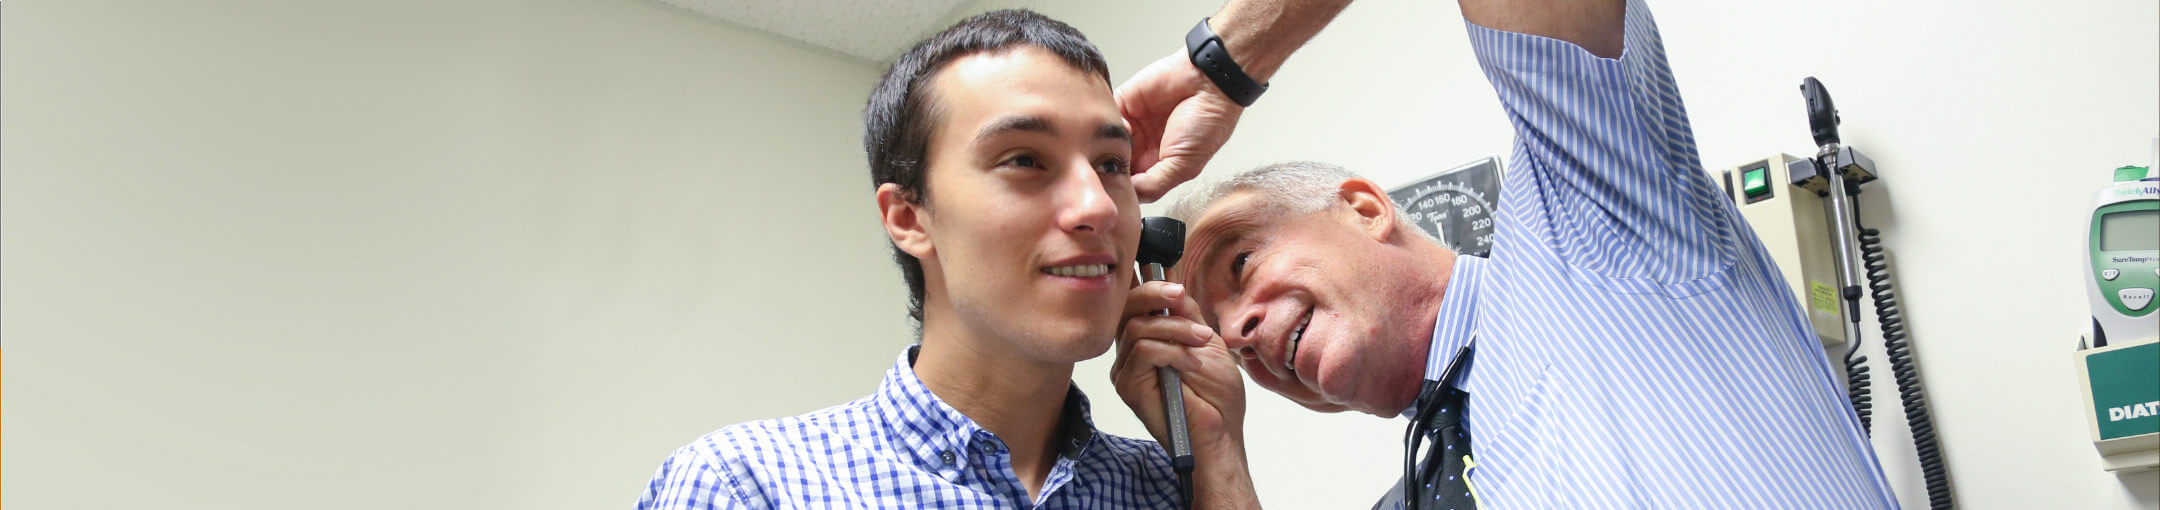 A medical professional examining a person's ear.